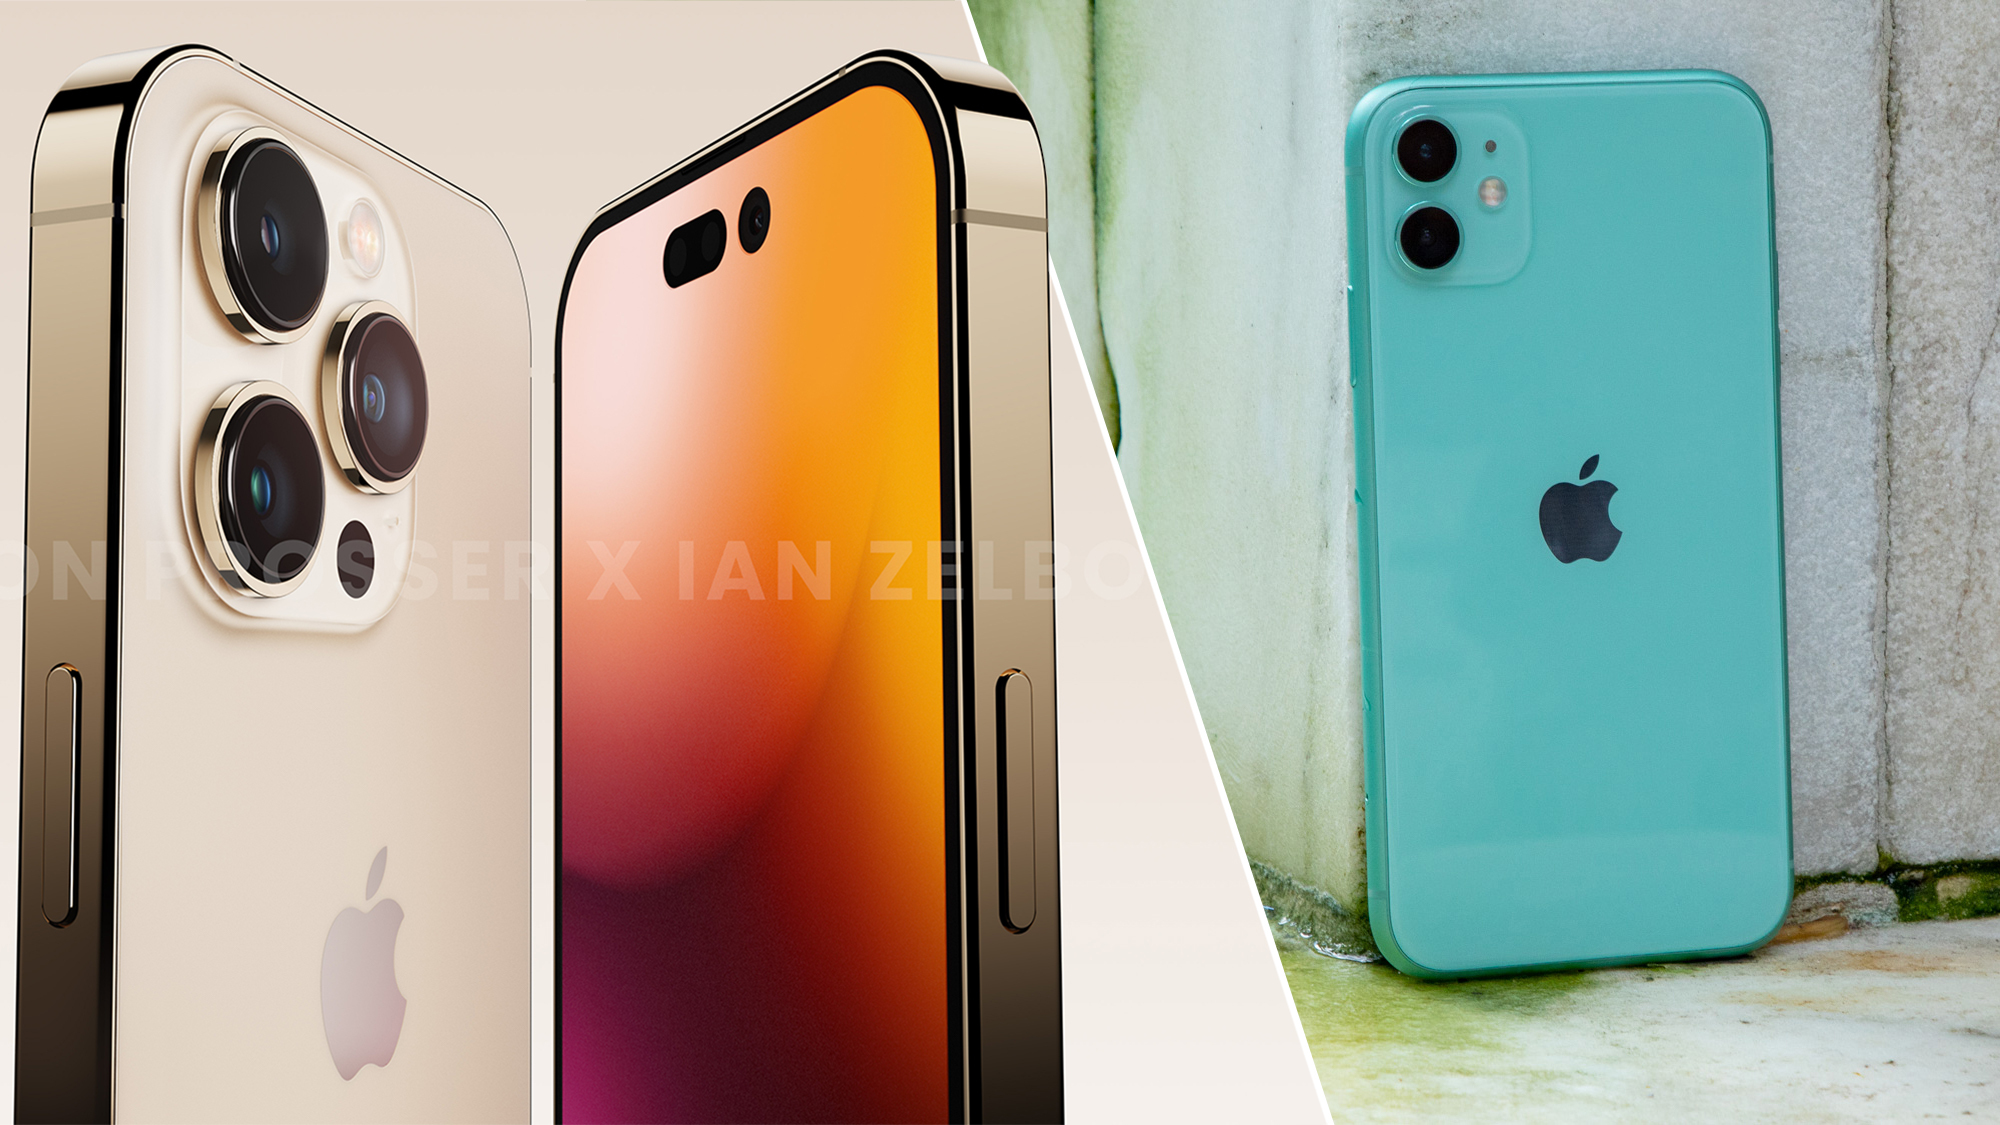 Split image of the rumored iPhone 14 Pro design and the actual image of the iPhone 11